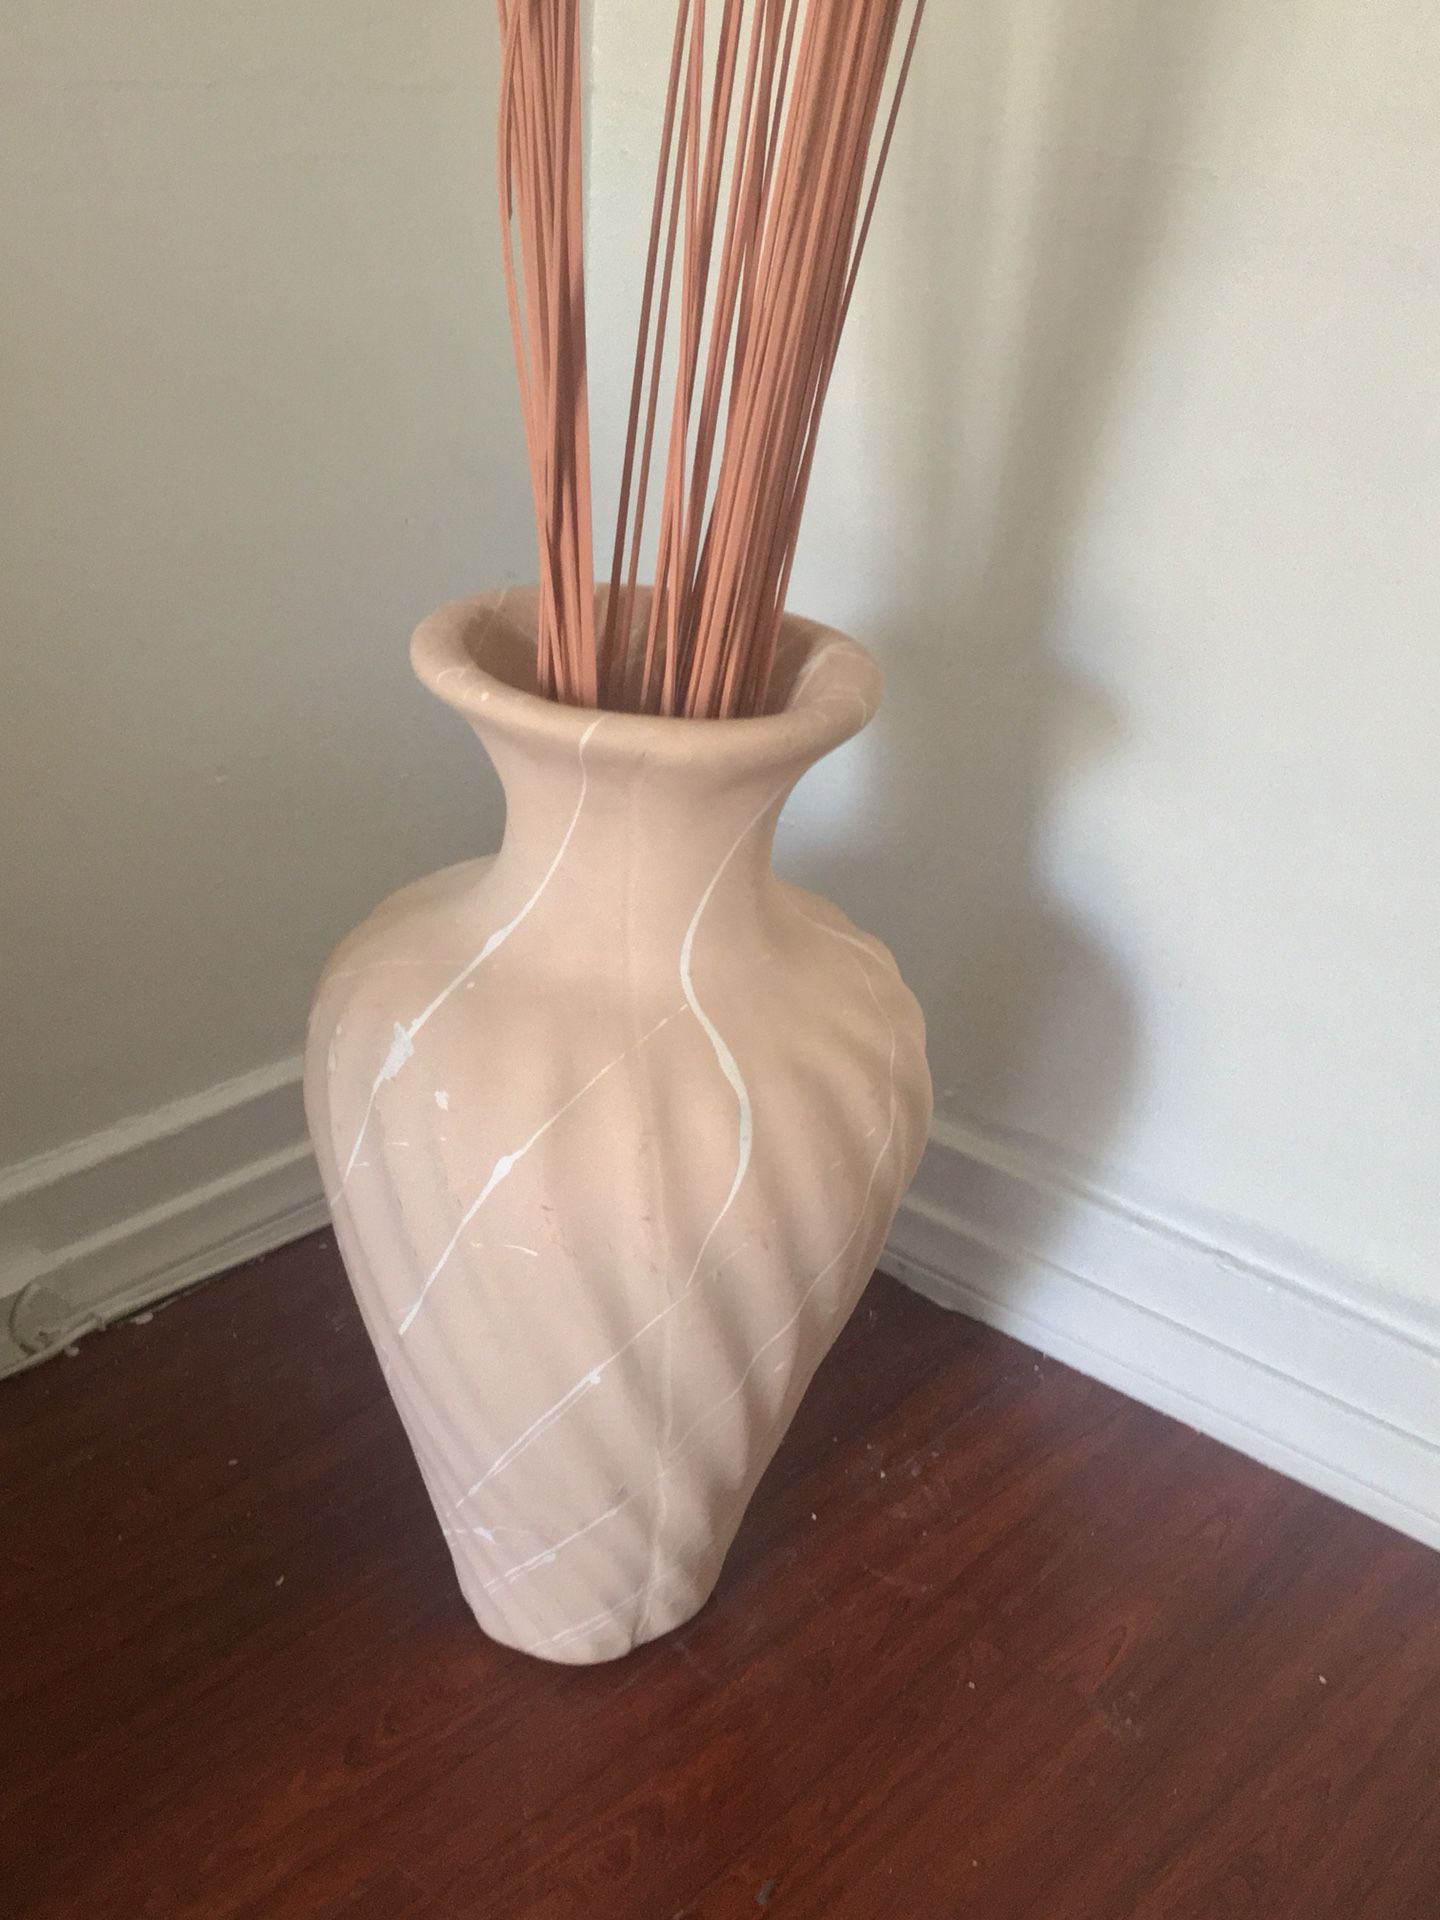 Vase Wooden Sticks: Over 2,528 Royalty-Free Licensable Stock Photos